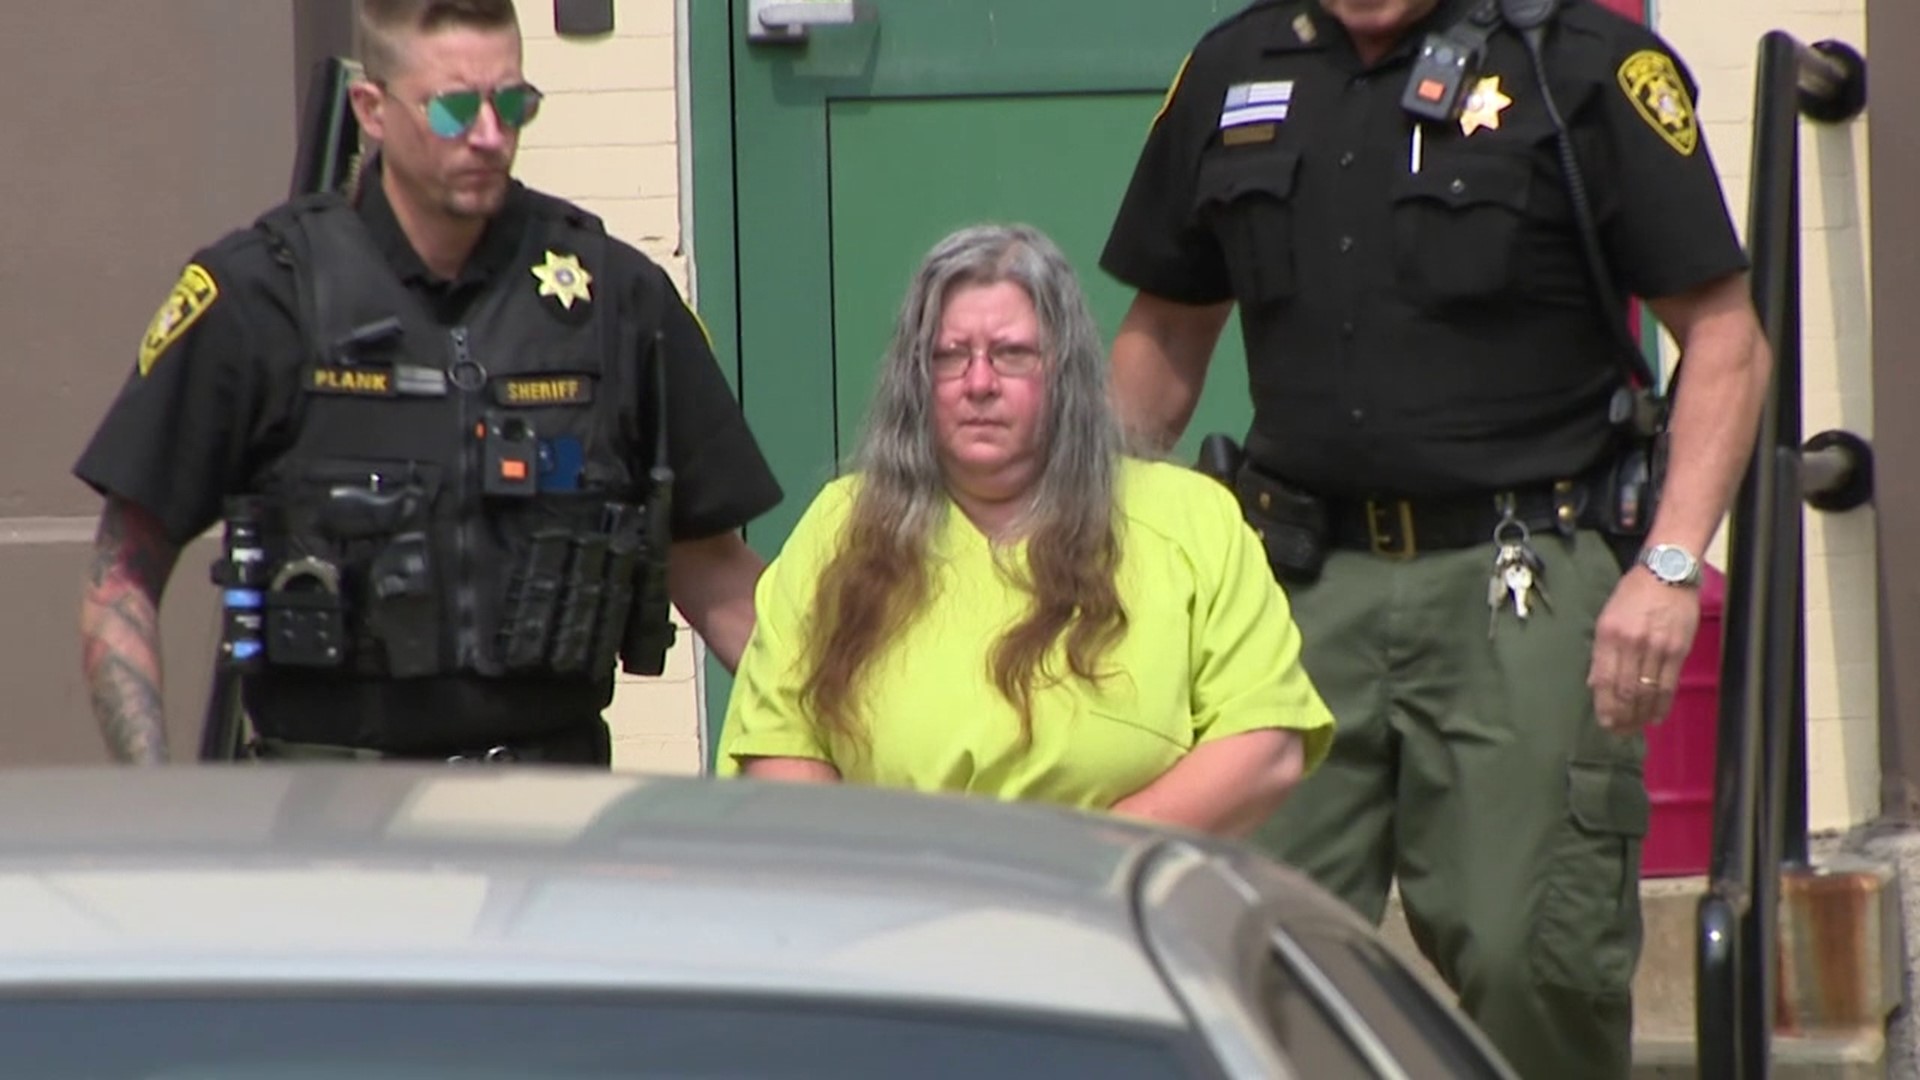 Lisa Karlaza was sentenced Thursday after a no-contest plea in the homicide death of her husband.